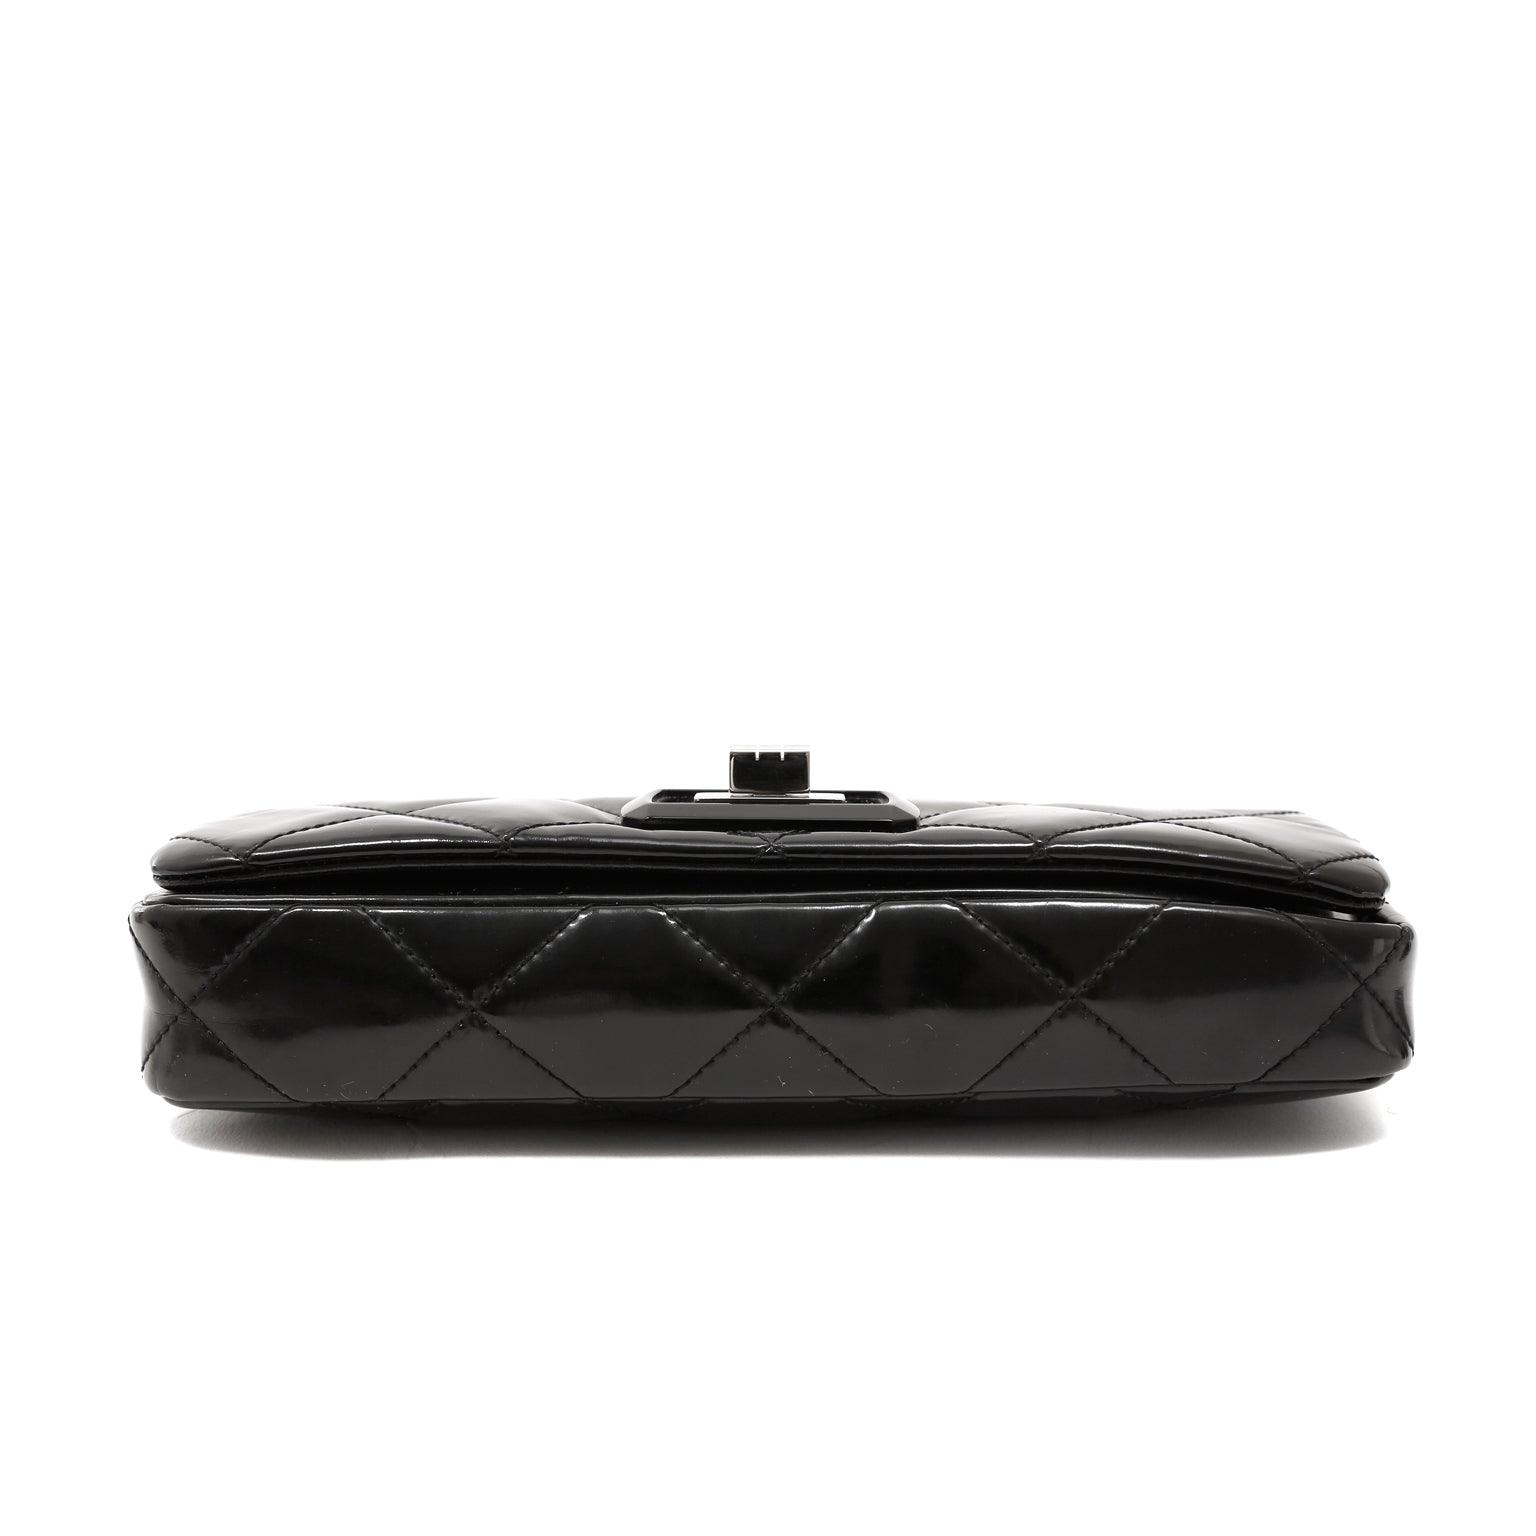 Chanel Black Patent Leather East West Reissue Flap Bag – Only